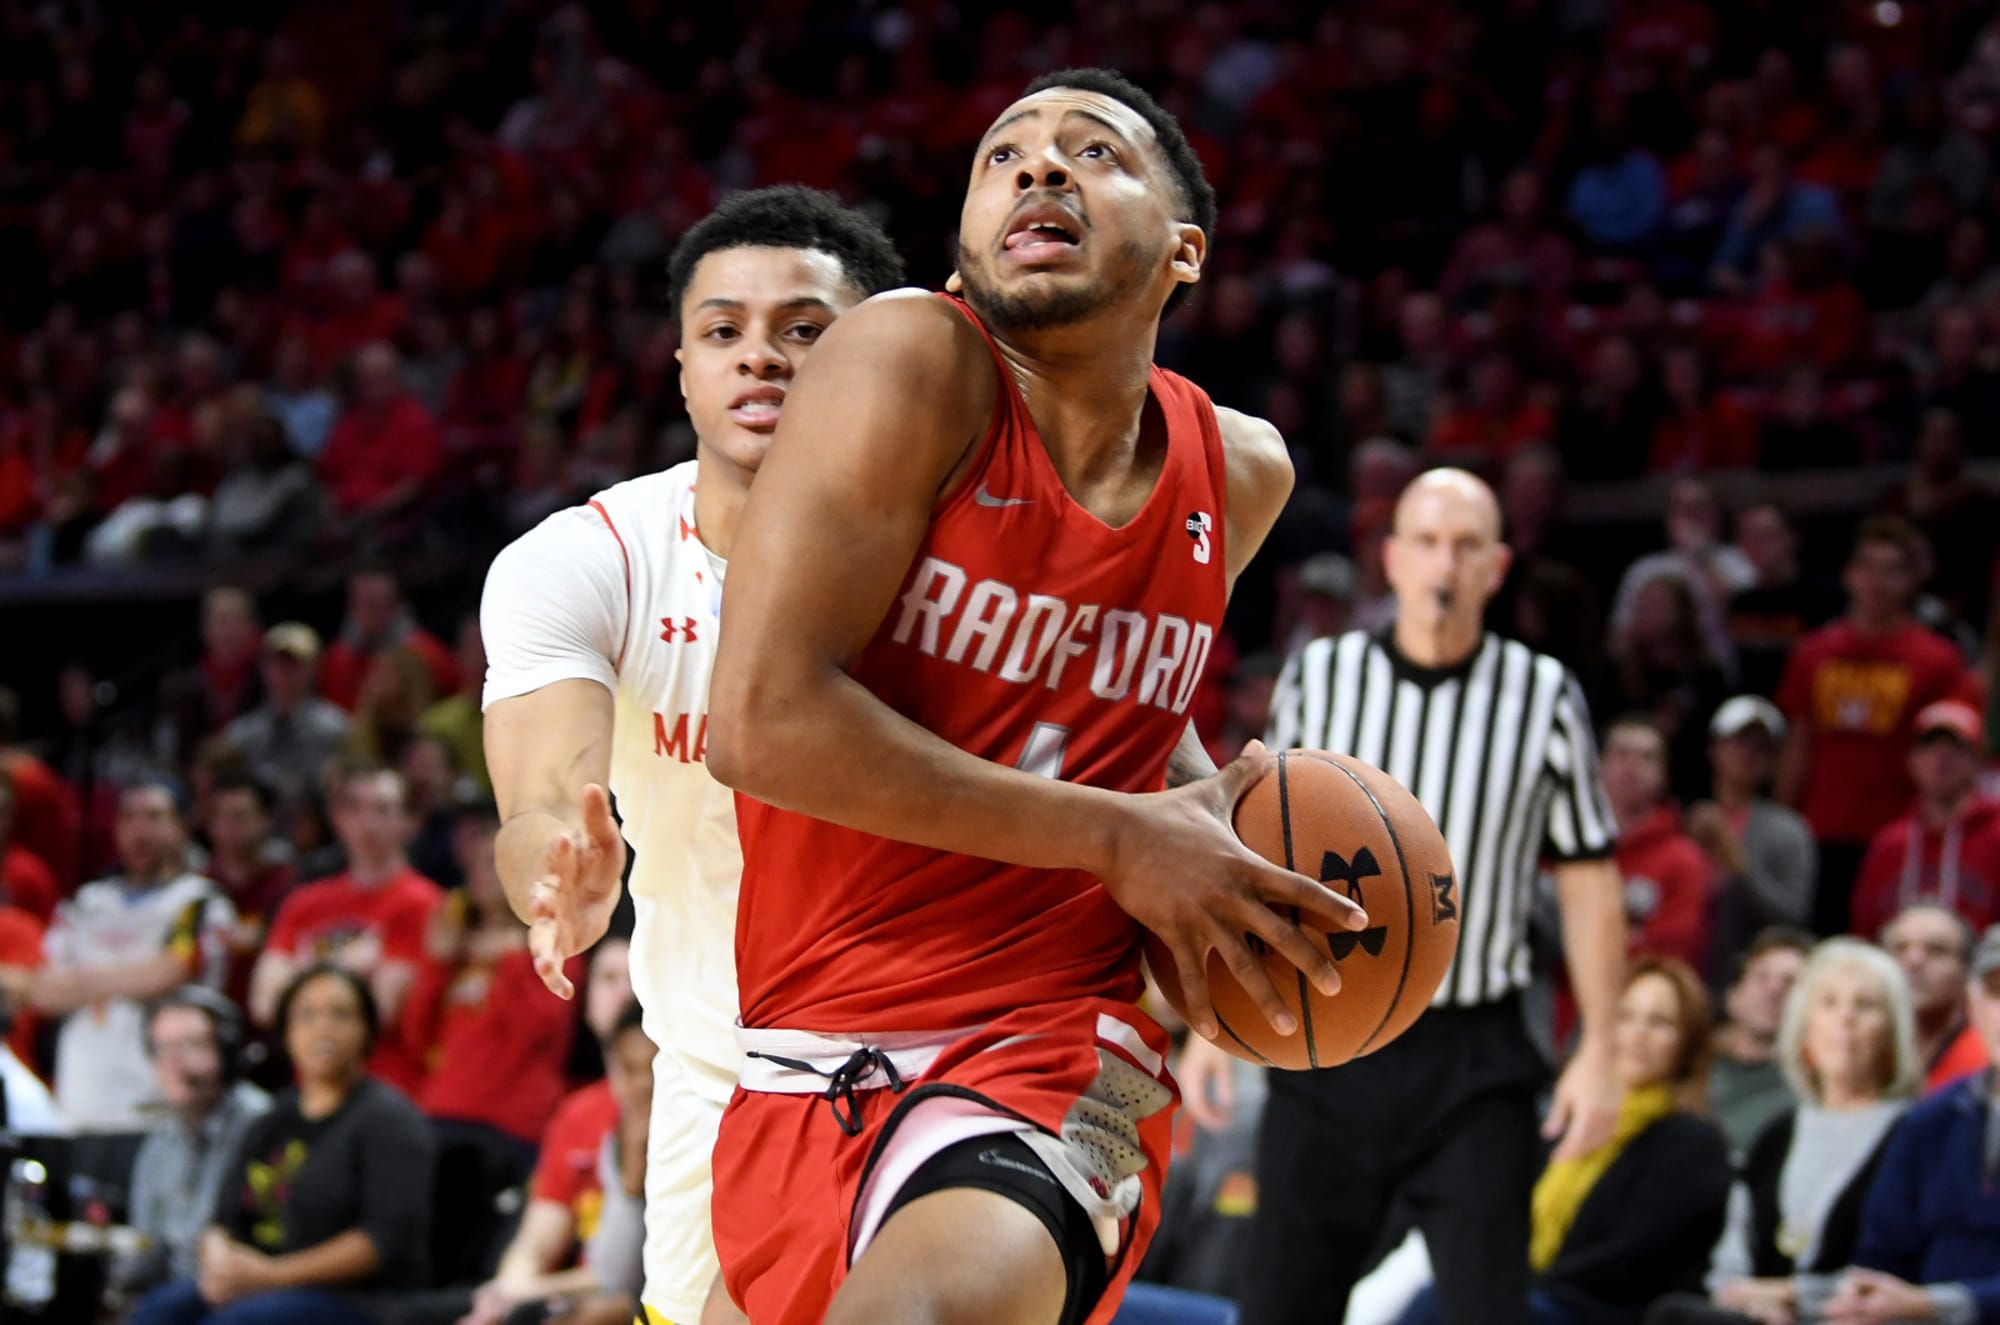 Louisville basketball: 2020-21 picture becoming clear for Chris Mack